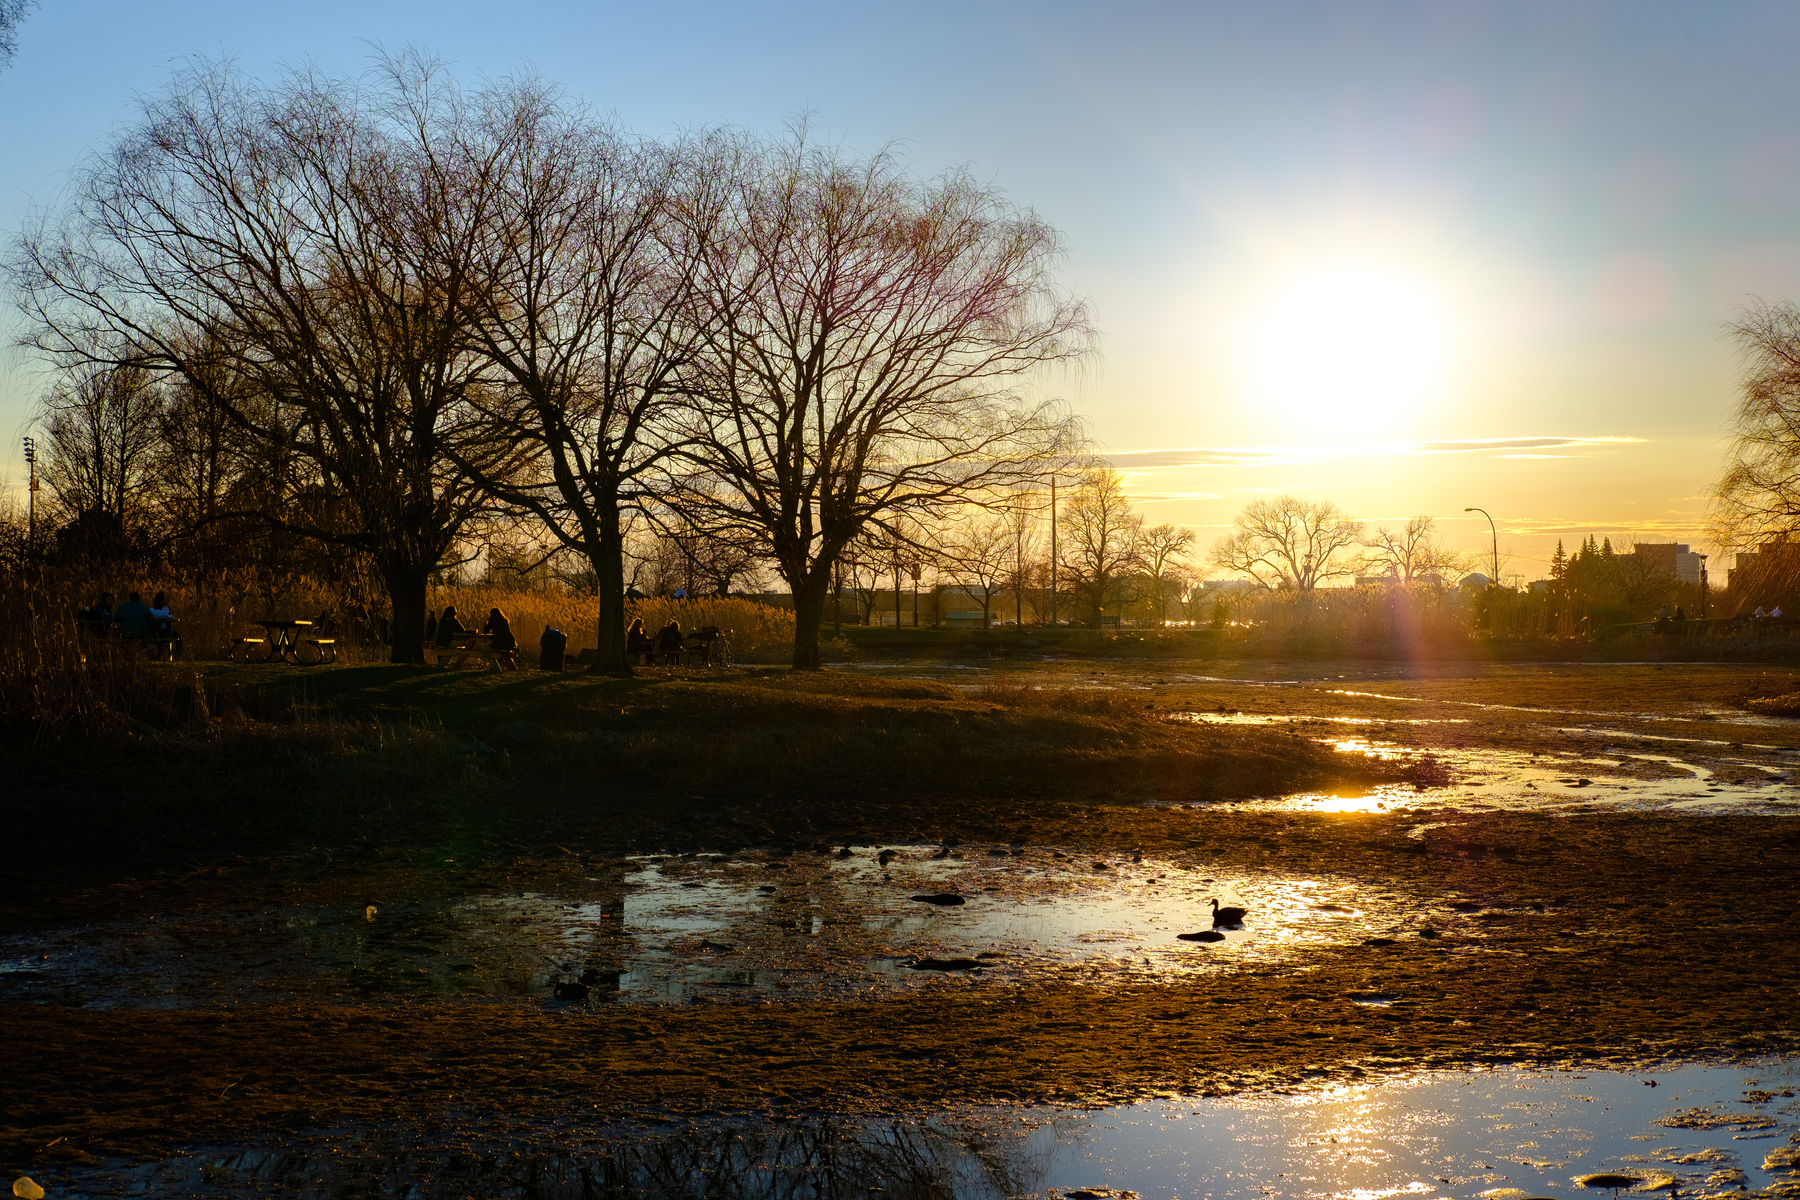 The sun is setting and the pond is dry. A lone duck wanders through the pond bed.